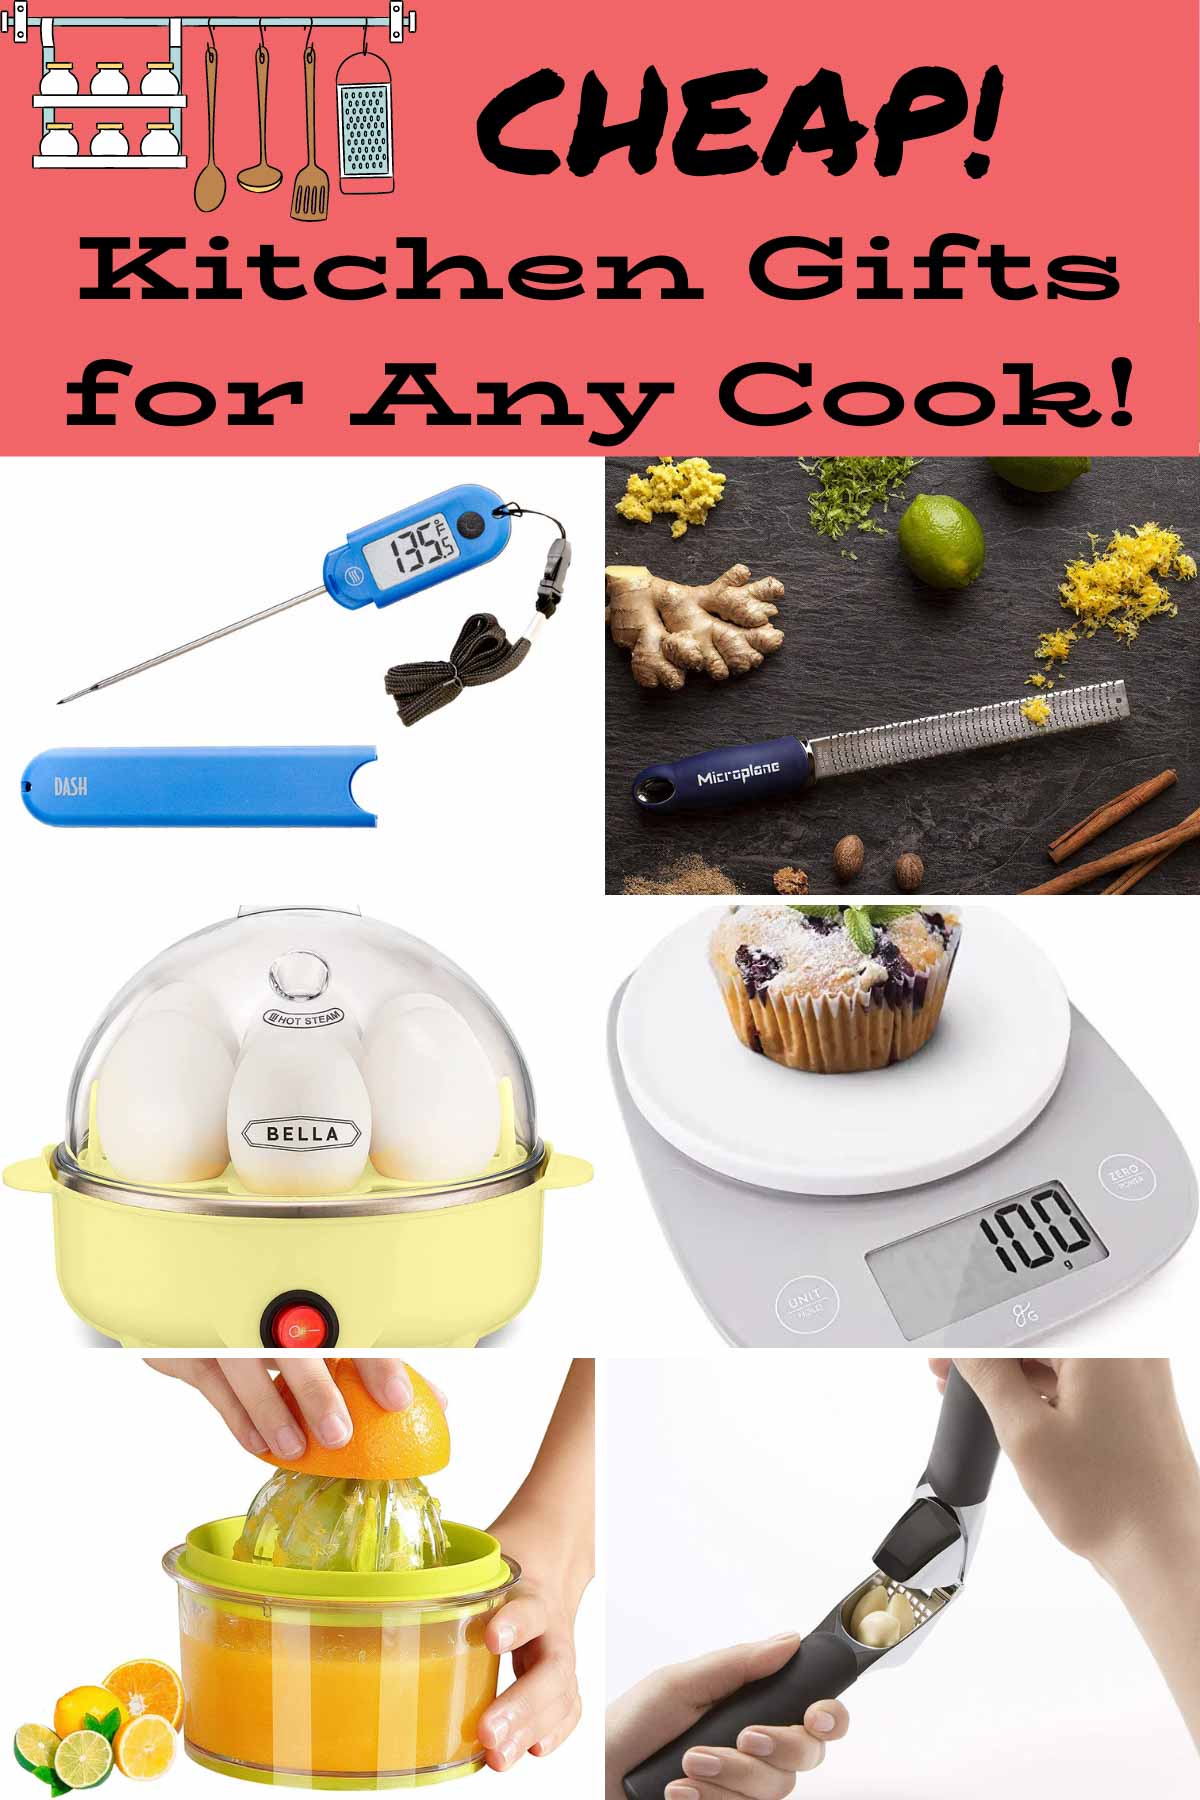 45+ Cheap Kitchen Gifts Ideas For Any Cook! - Best Tools & Essentials